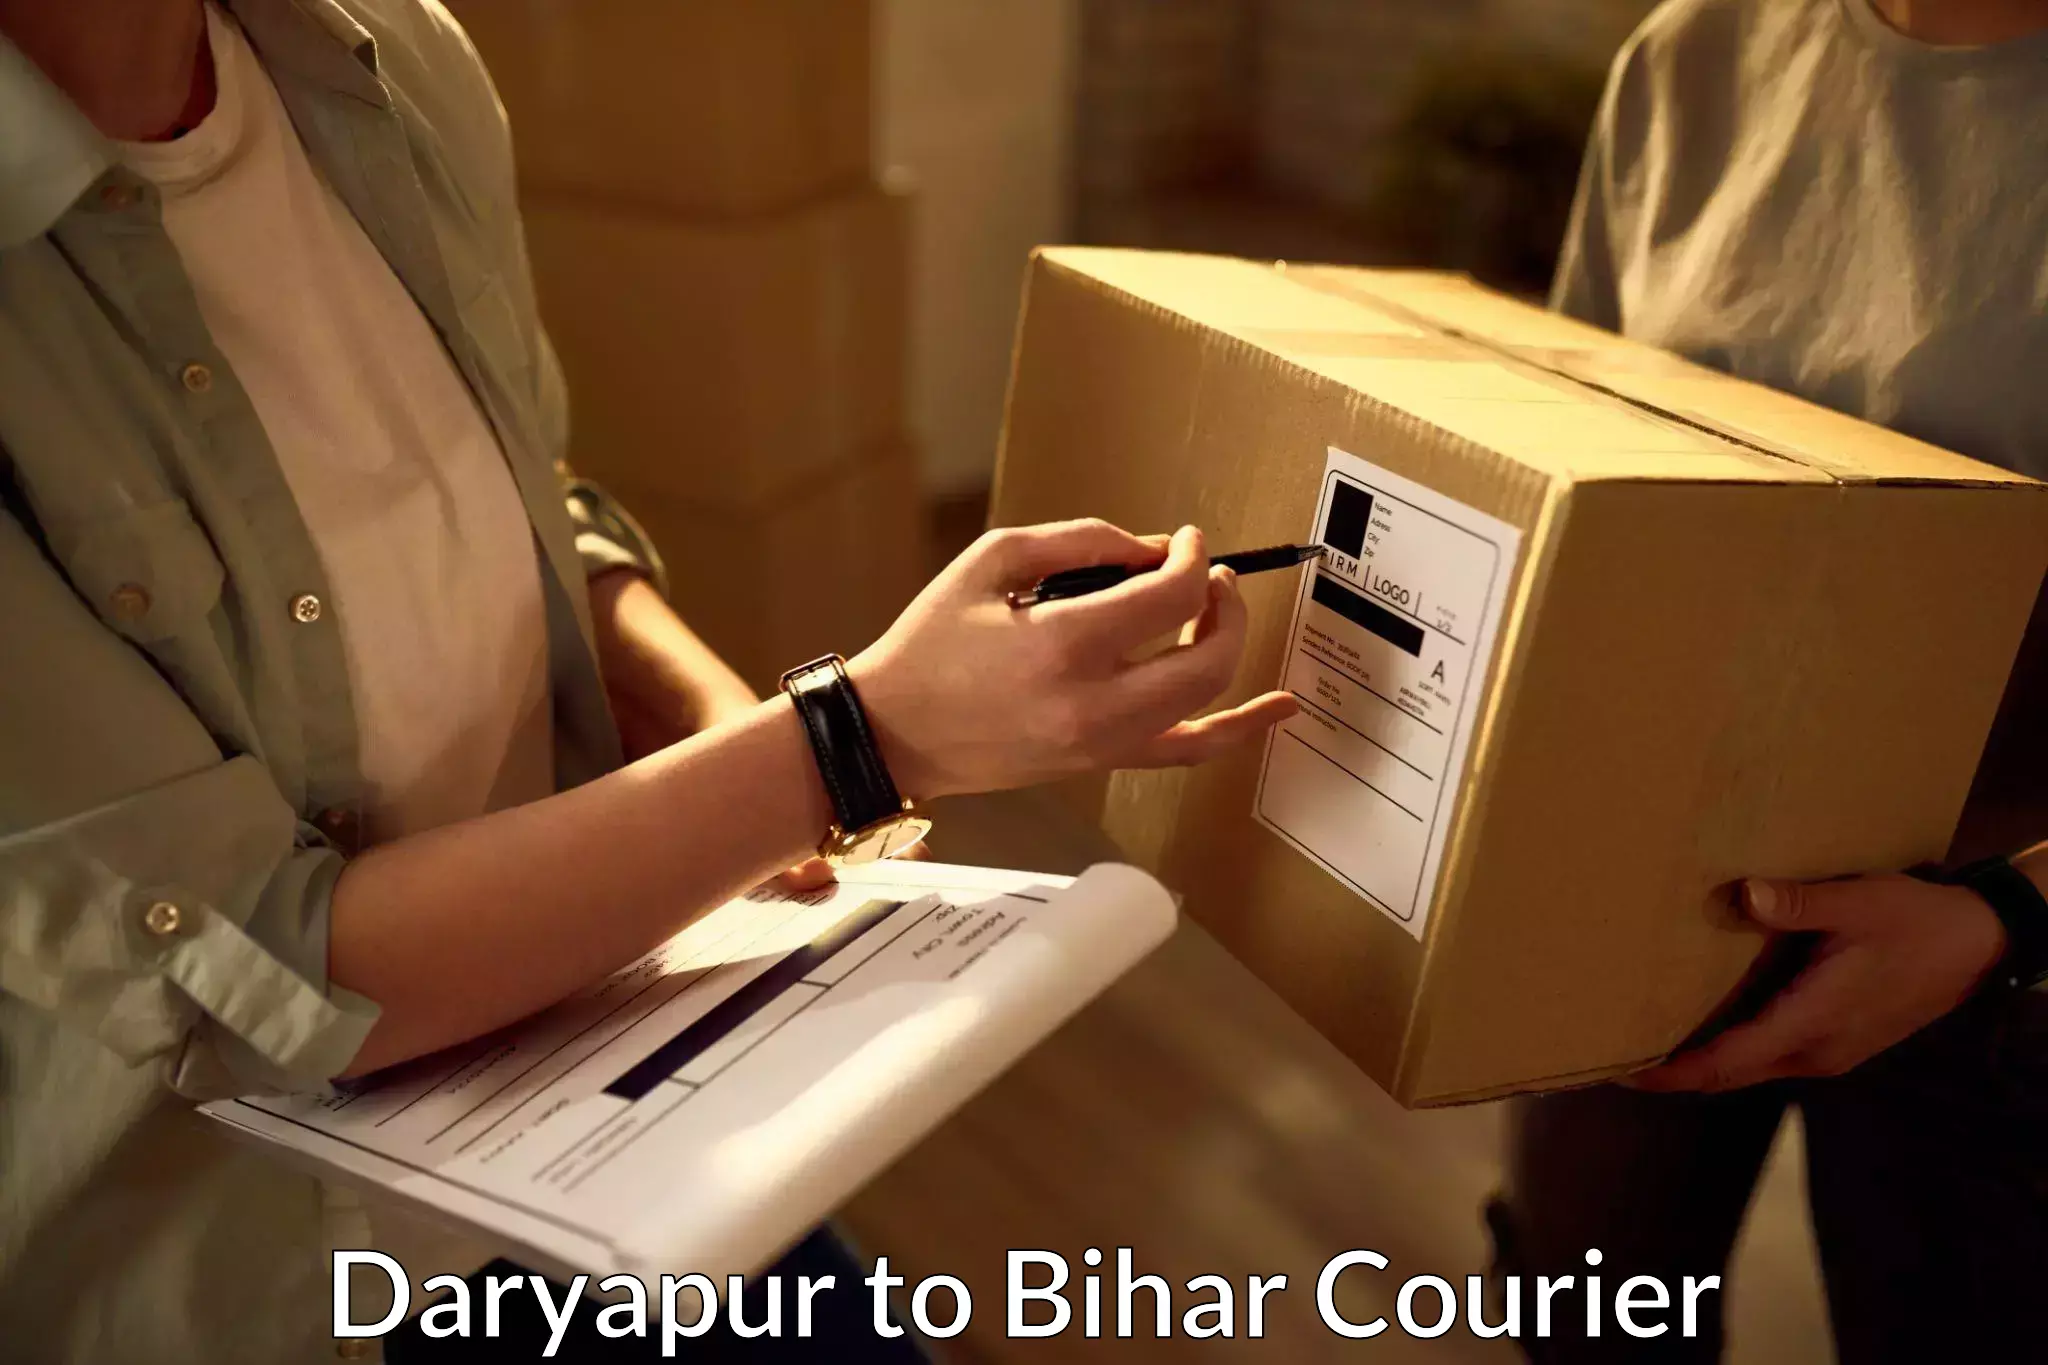 Rapid shipping services Daryapur to Dehri